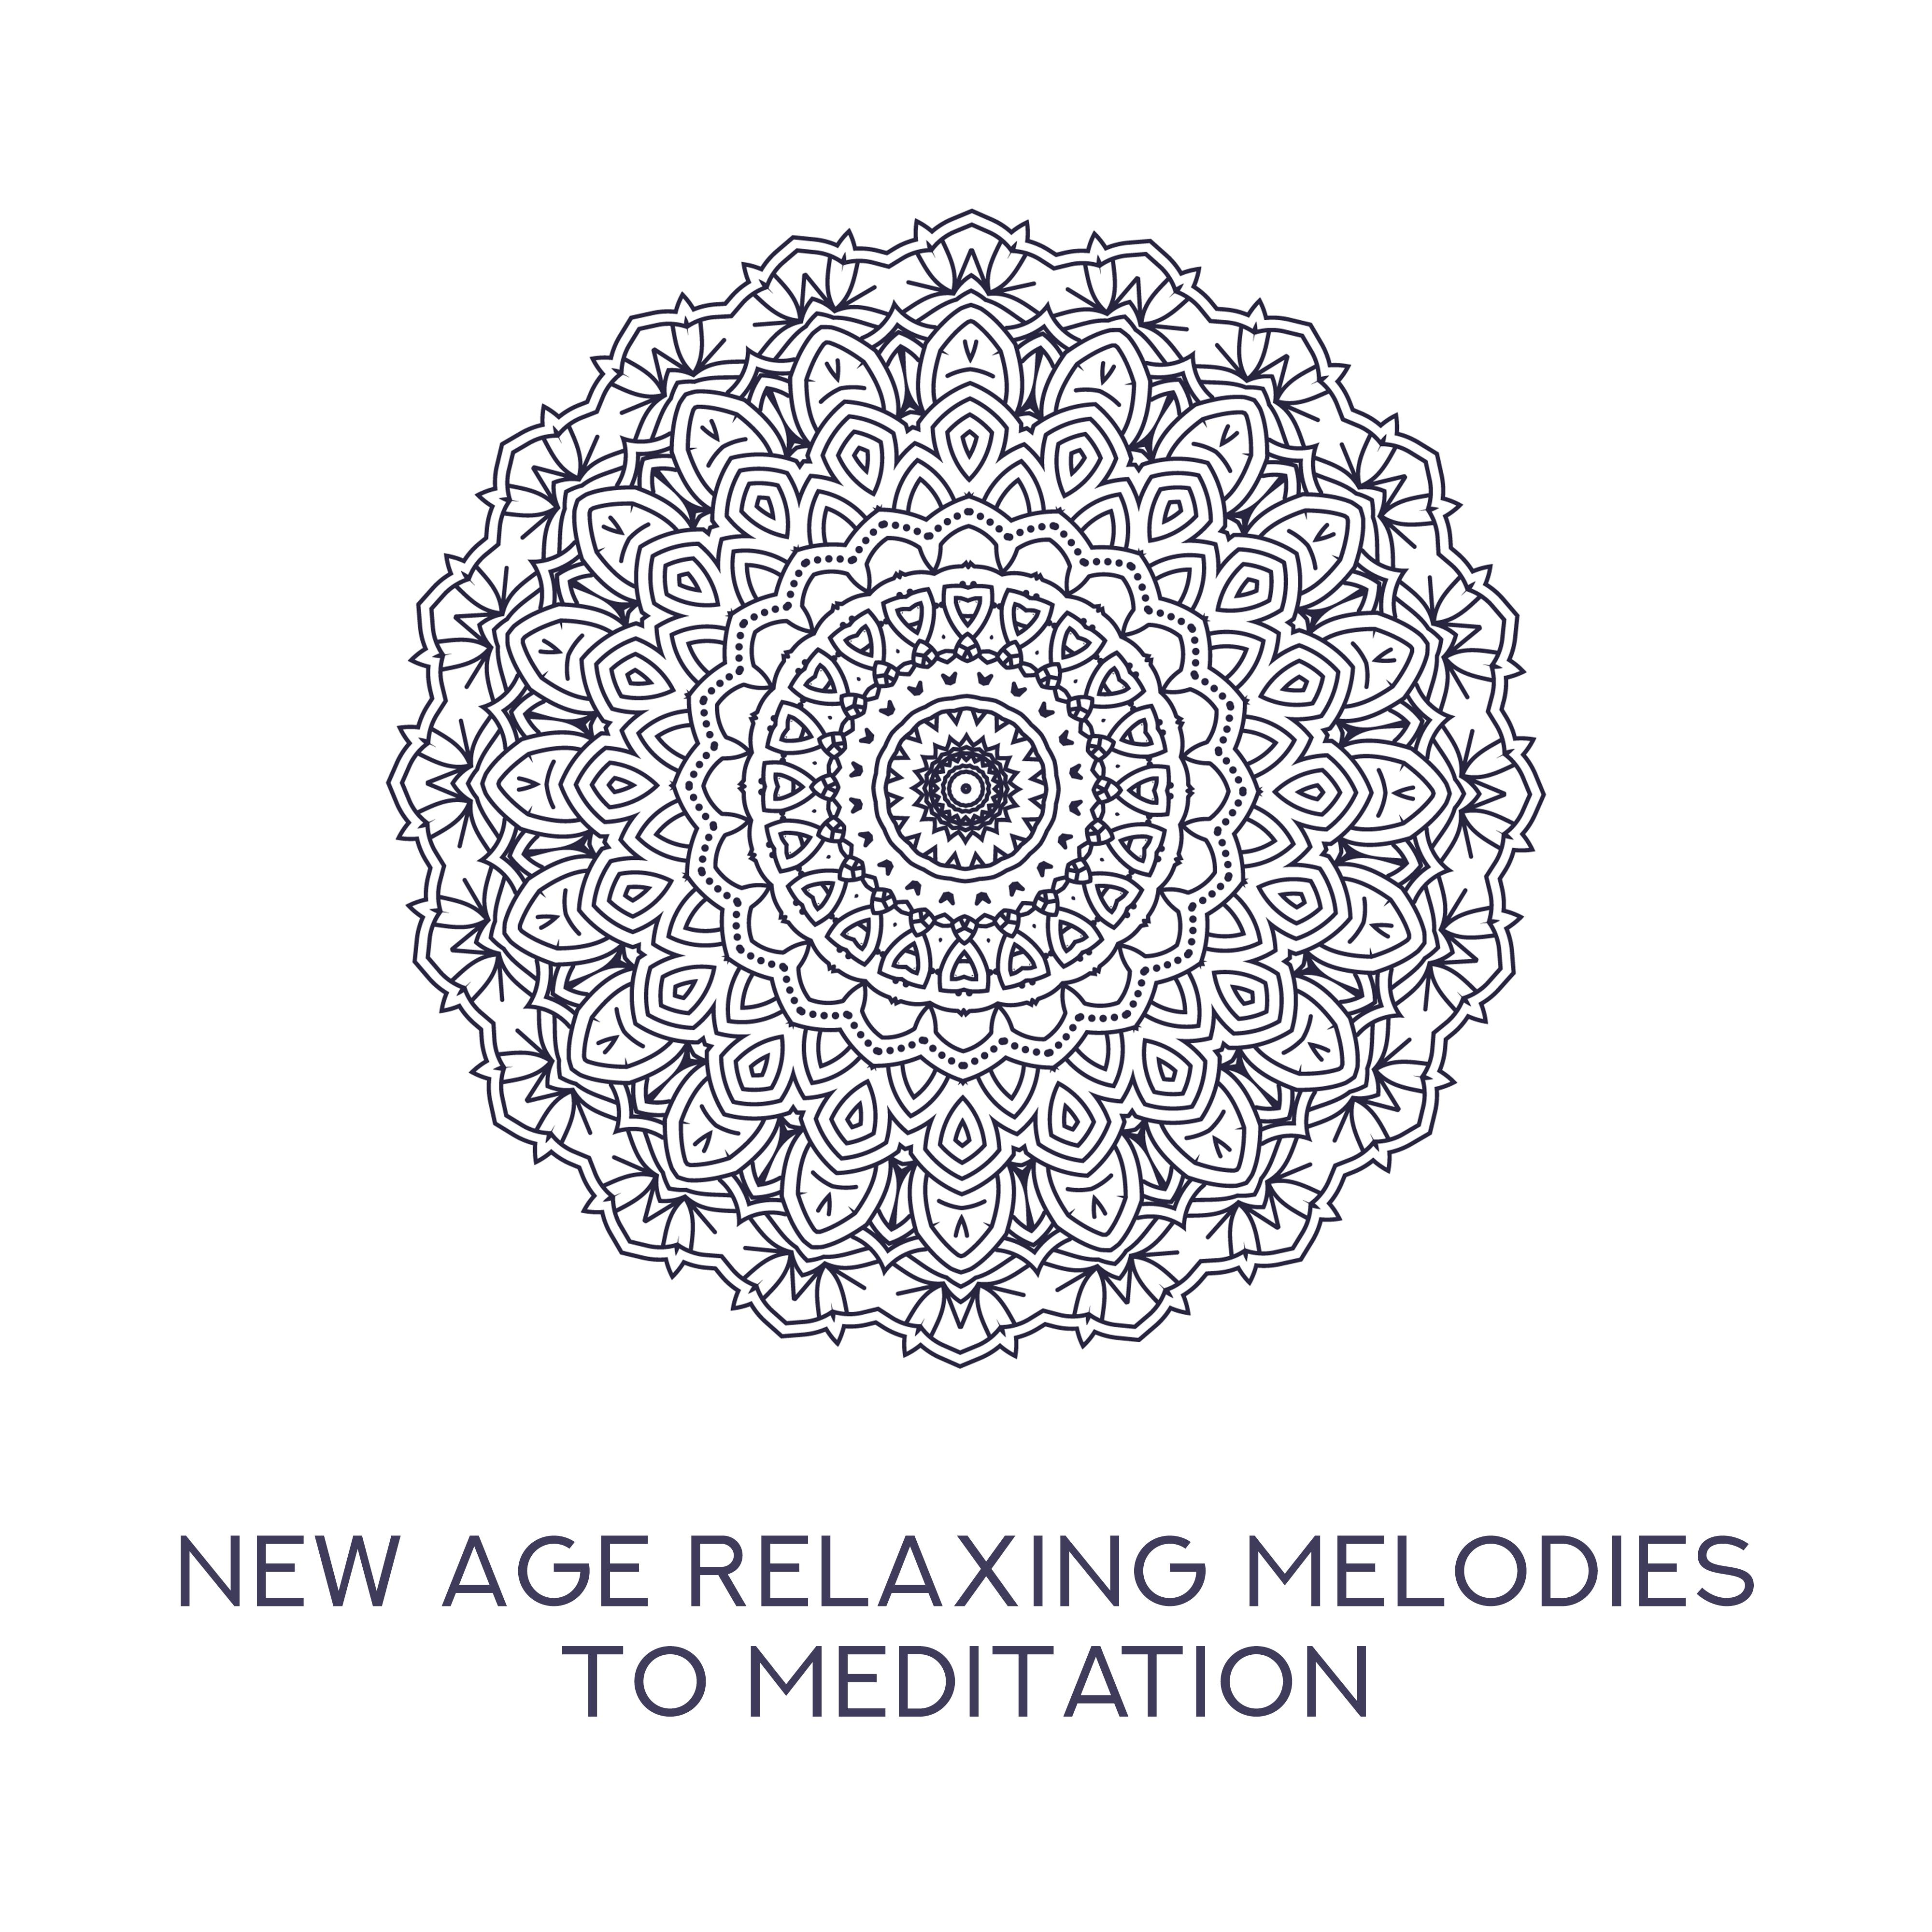 New Age Relaxing Melodies to Meditation